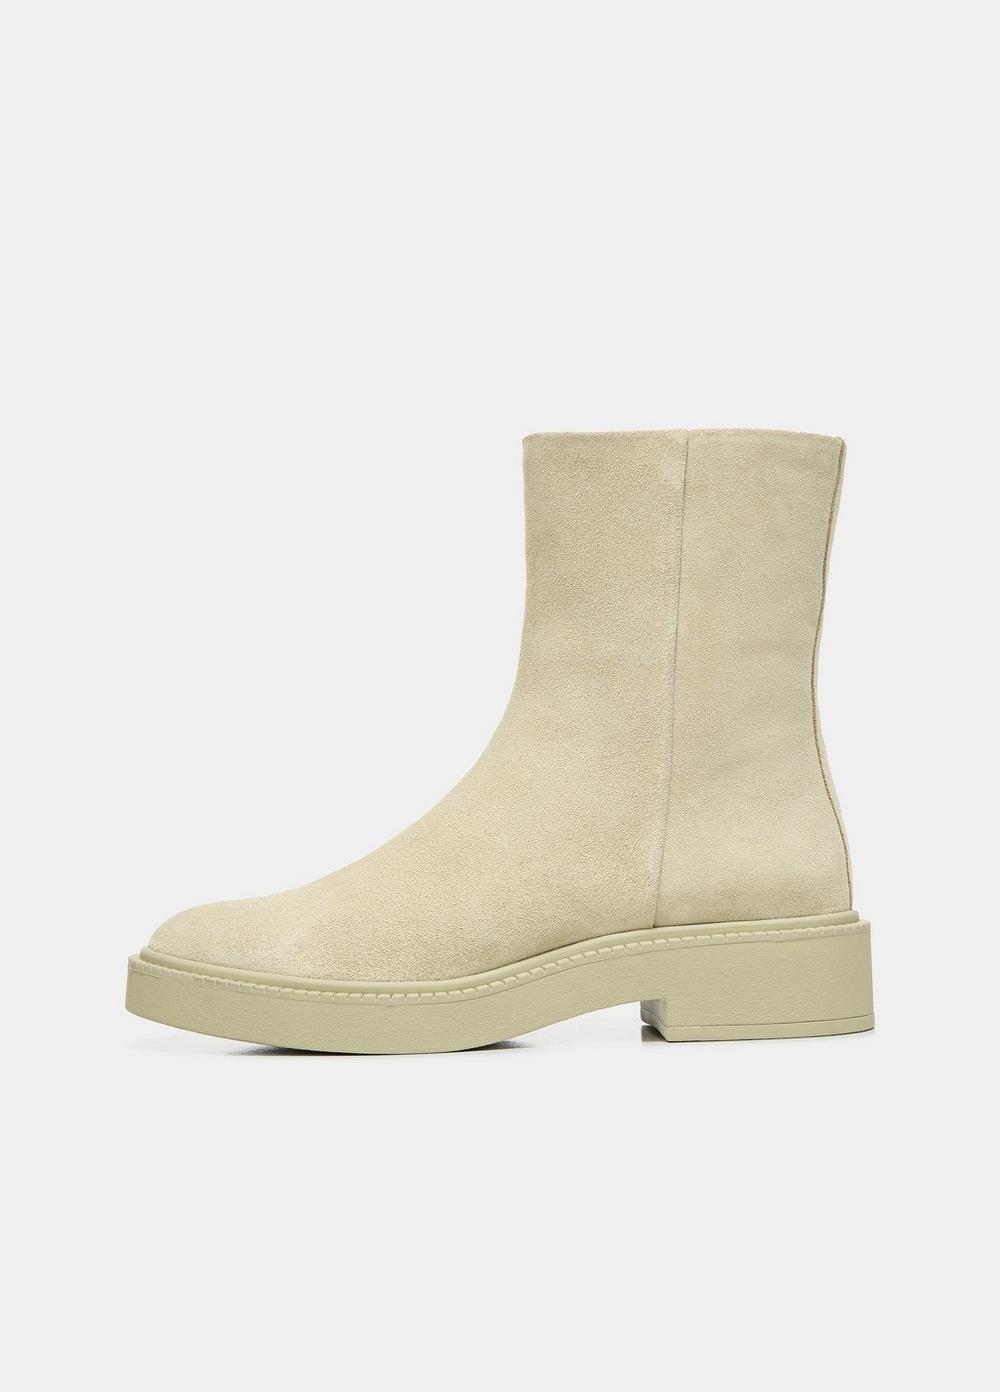 Kady Suede Low Boot